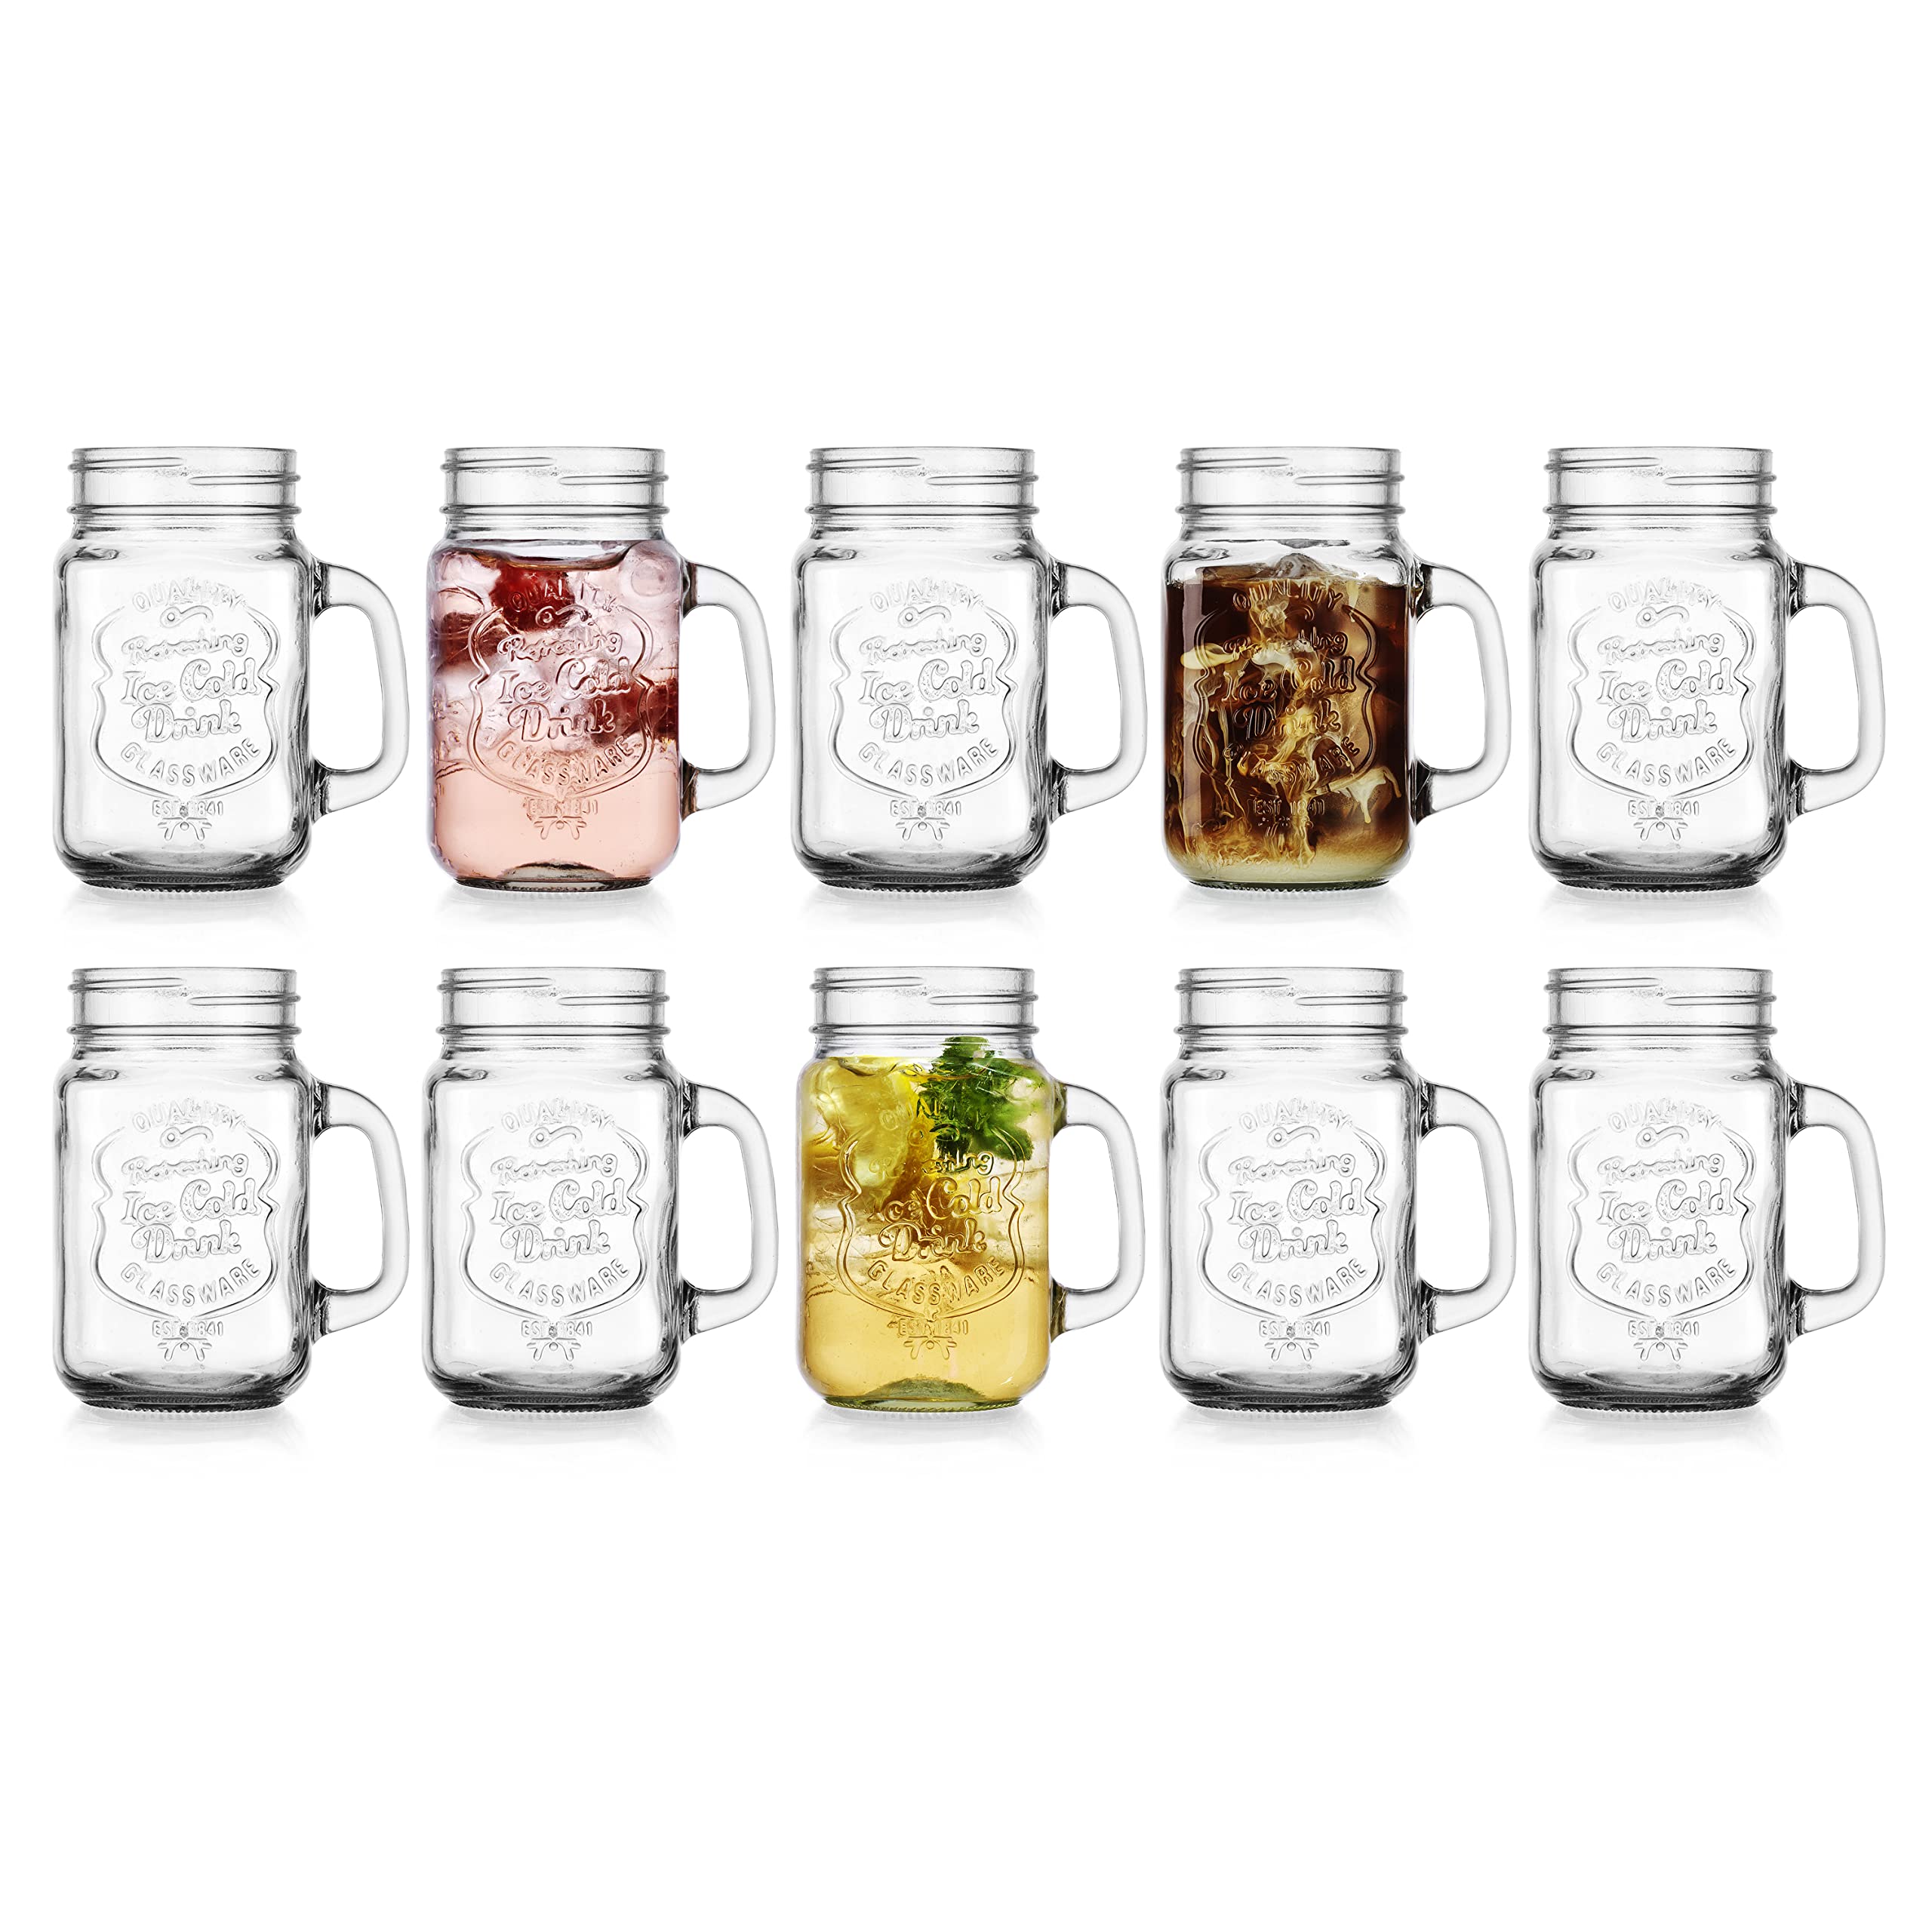 Glaver's Set of 10 Ice Cold 16 Oz. Mason Drinking Glasses With Handles. Quality Refreshing Ice Cold Embossed Logo Jars for Beverages, Cocktails, Shakes, Smoothies, Sodas, Juice.  - Very Good